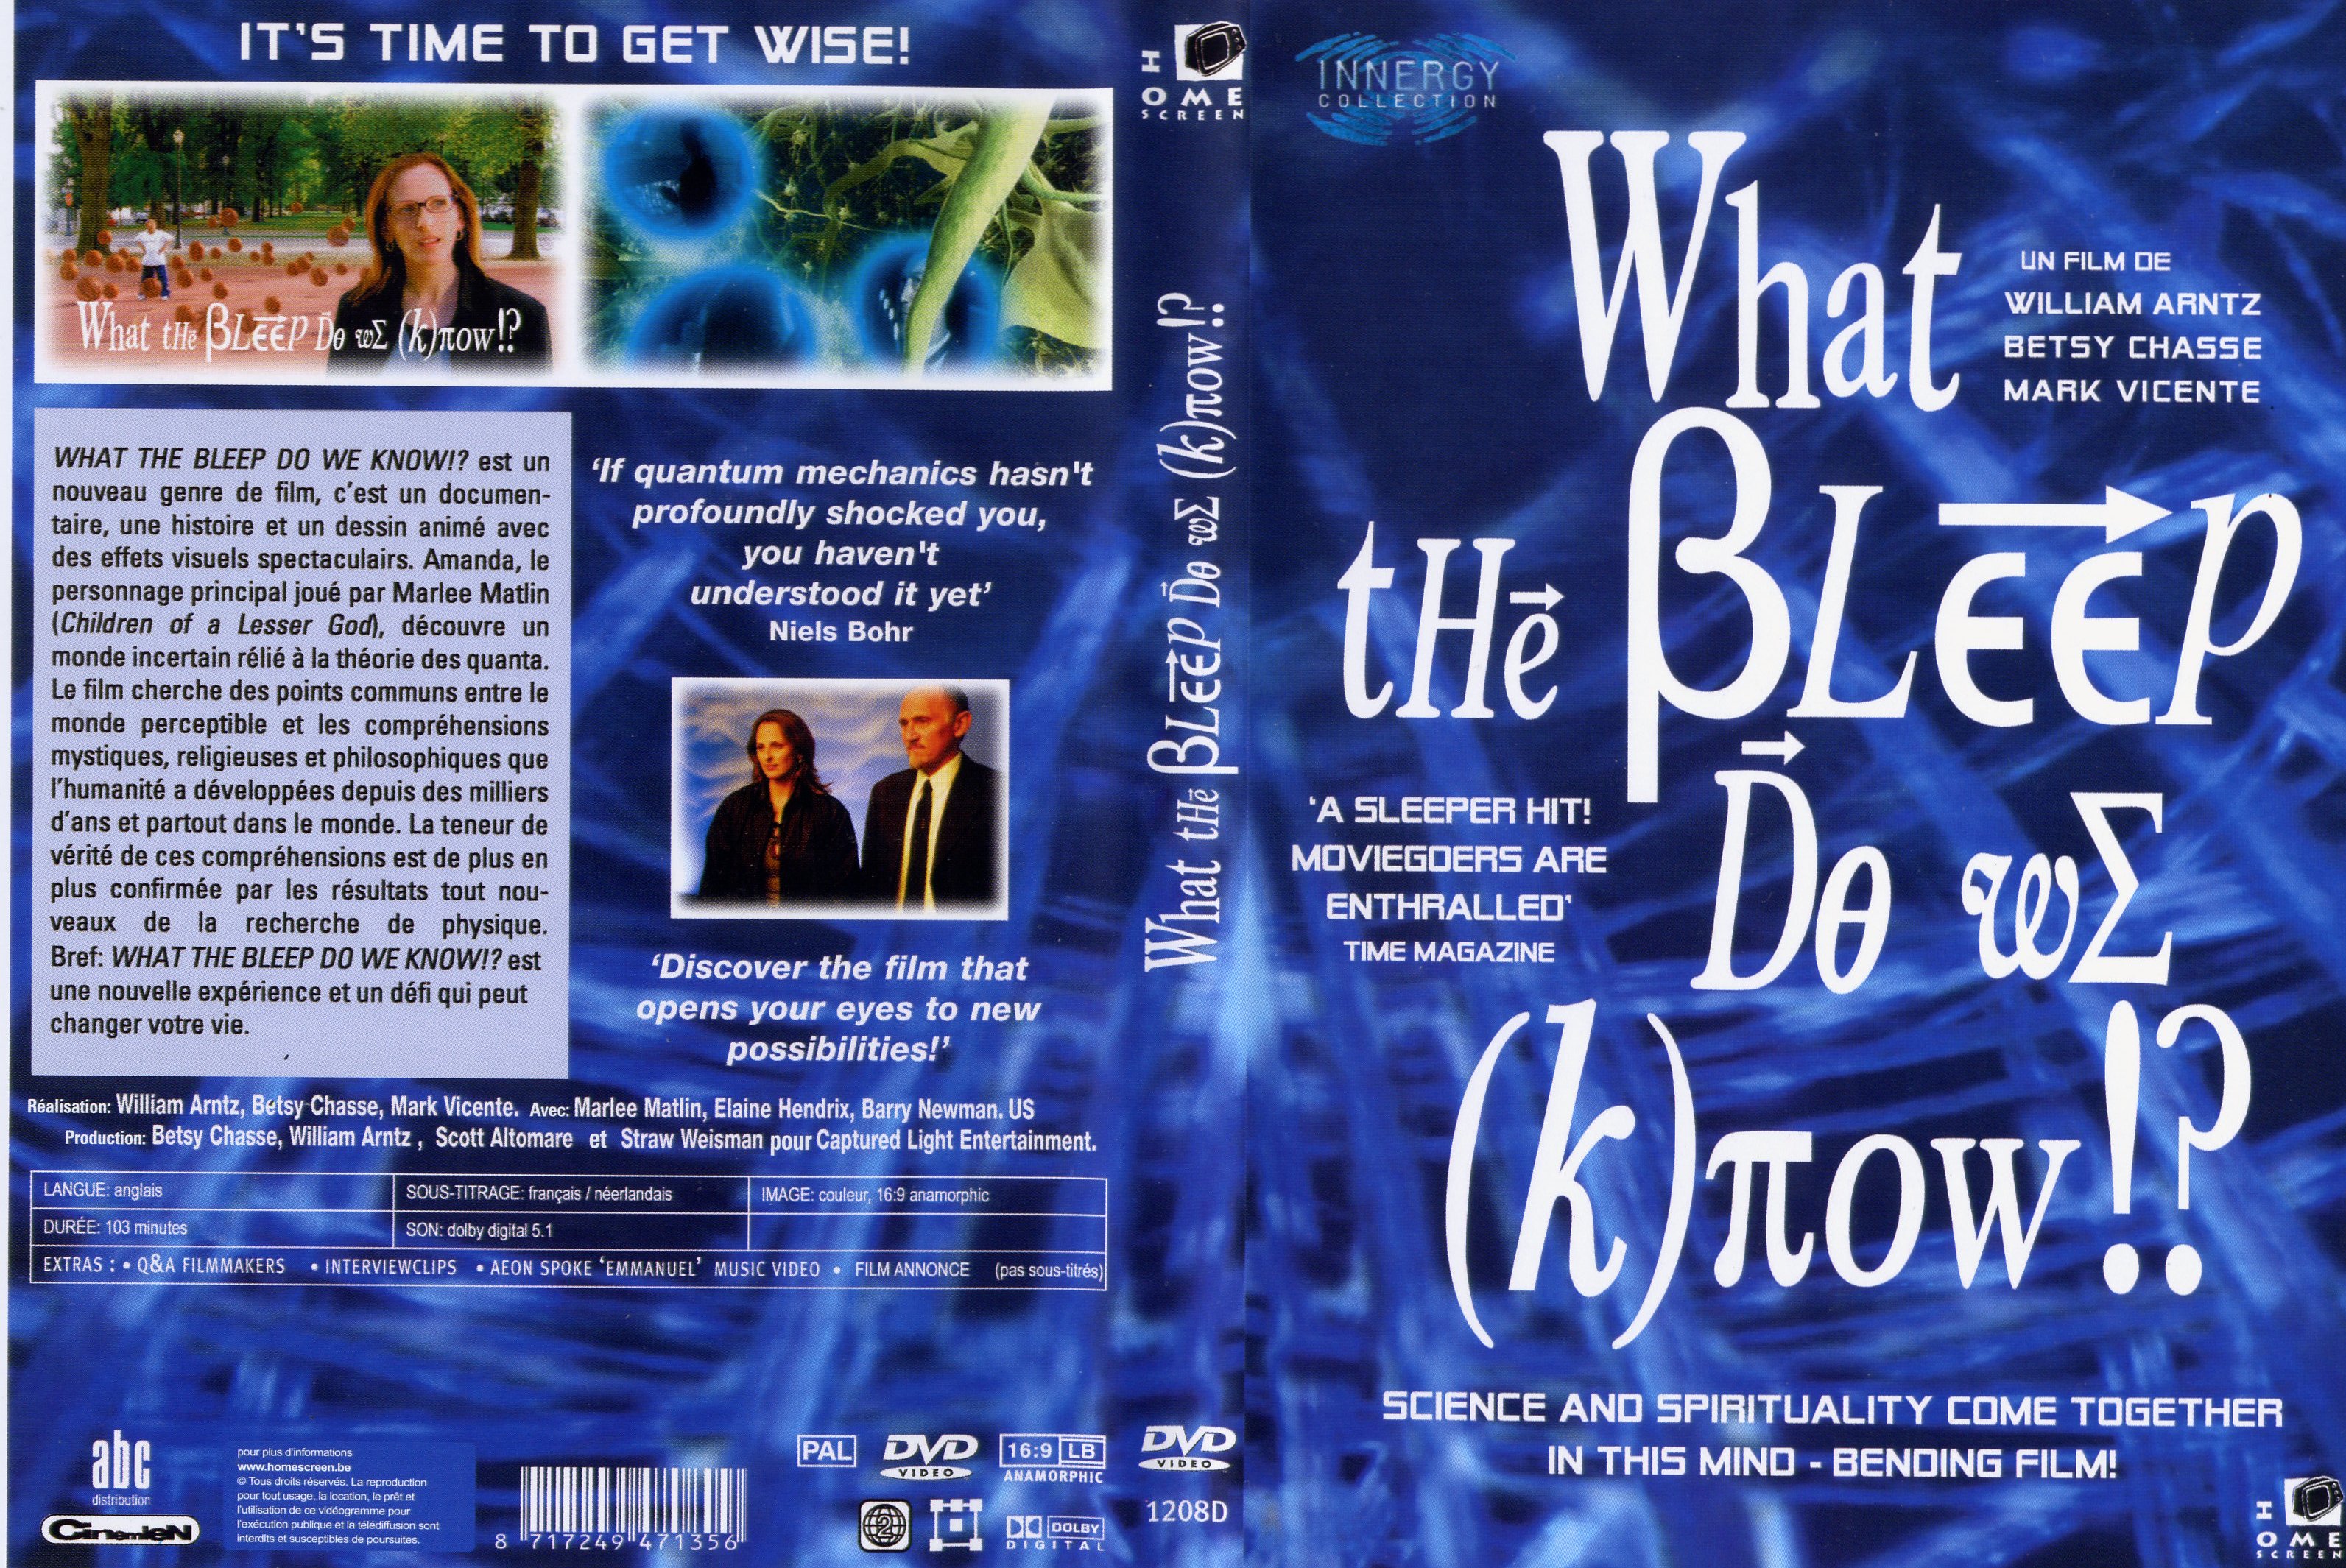 Jaquette DVD What the bleep do we know